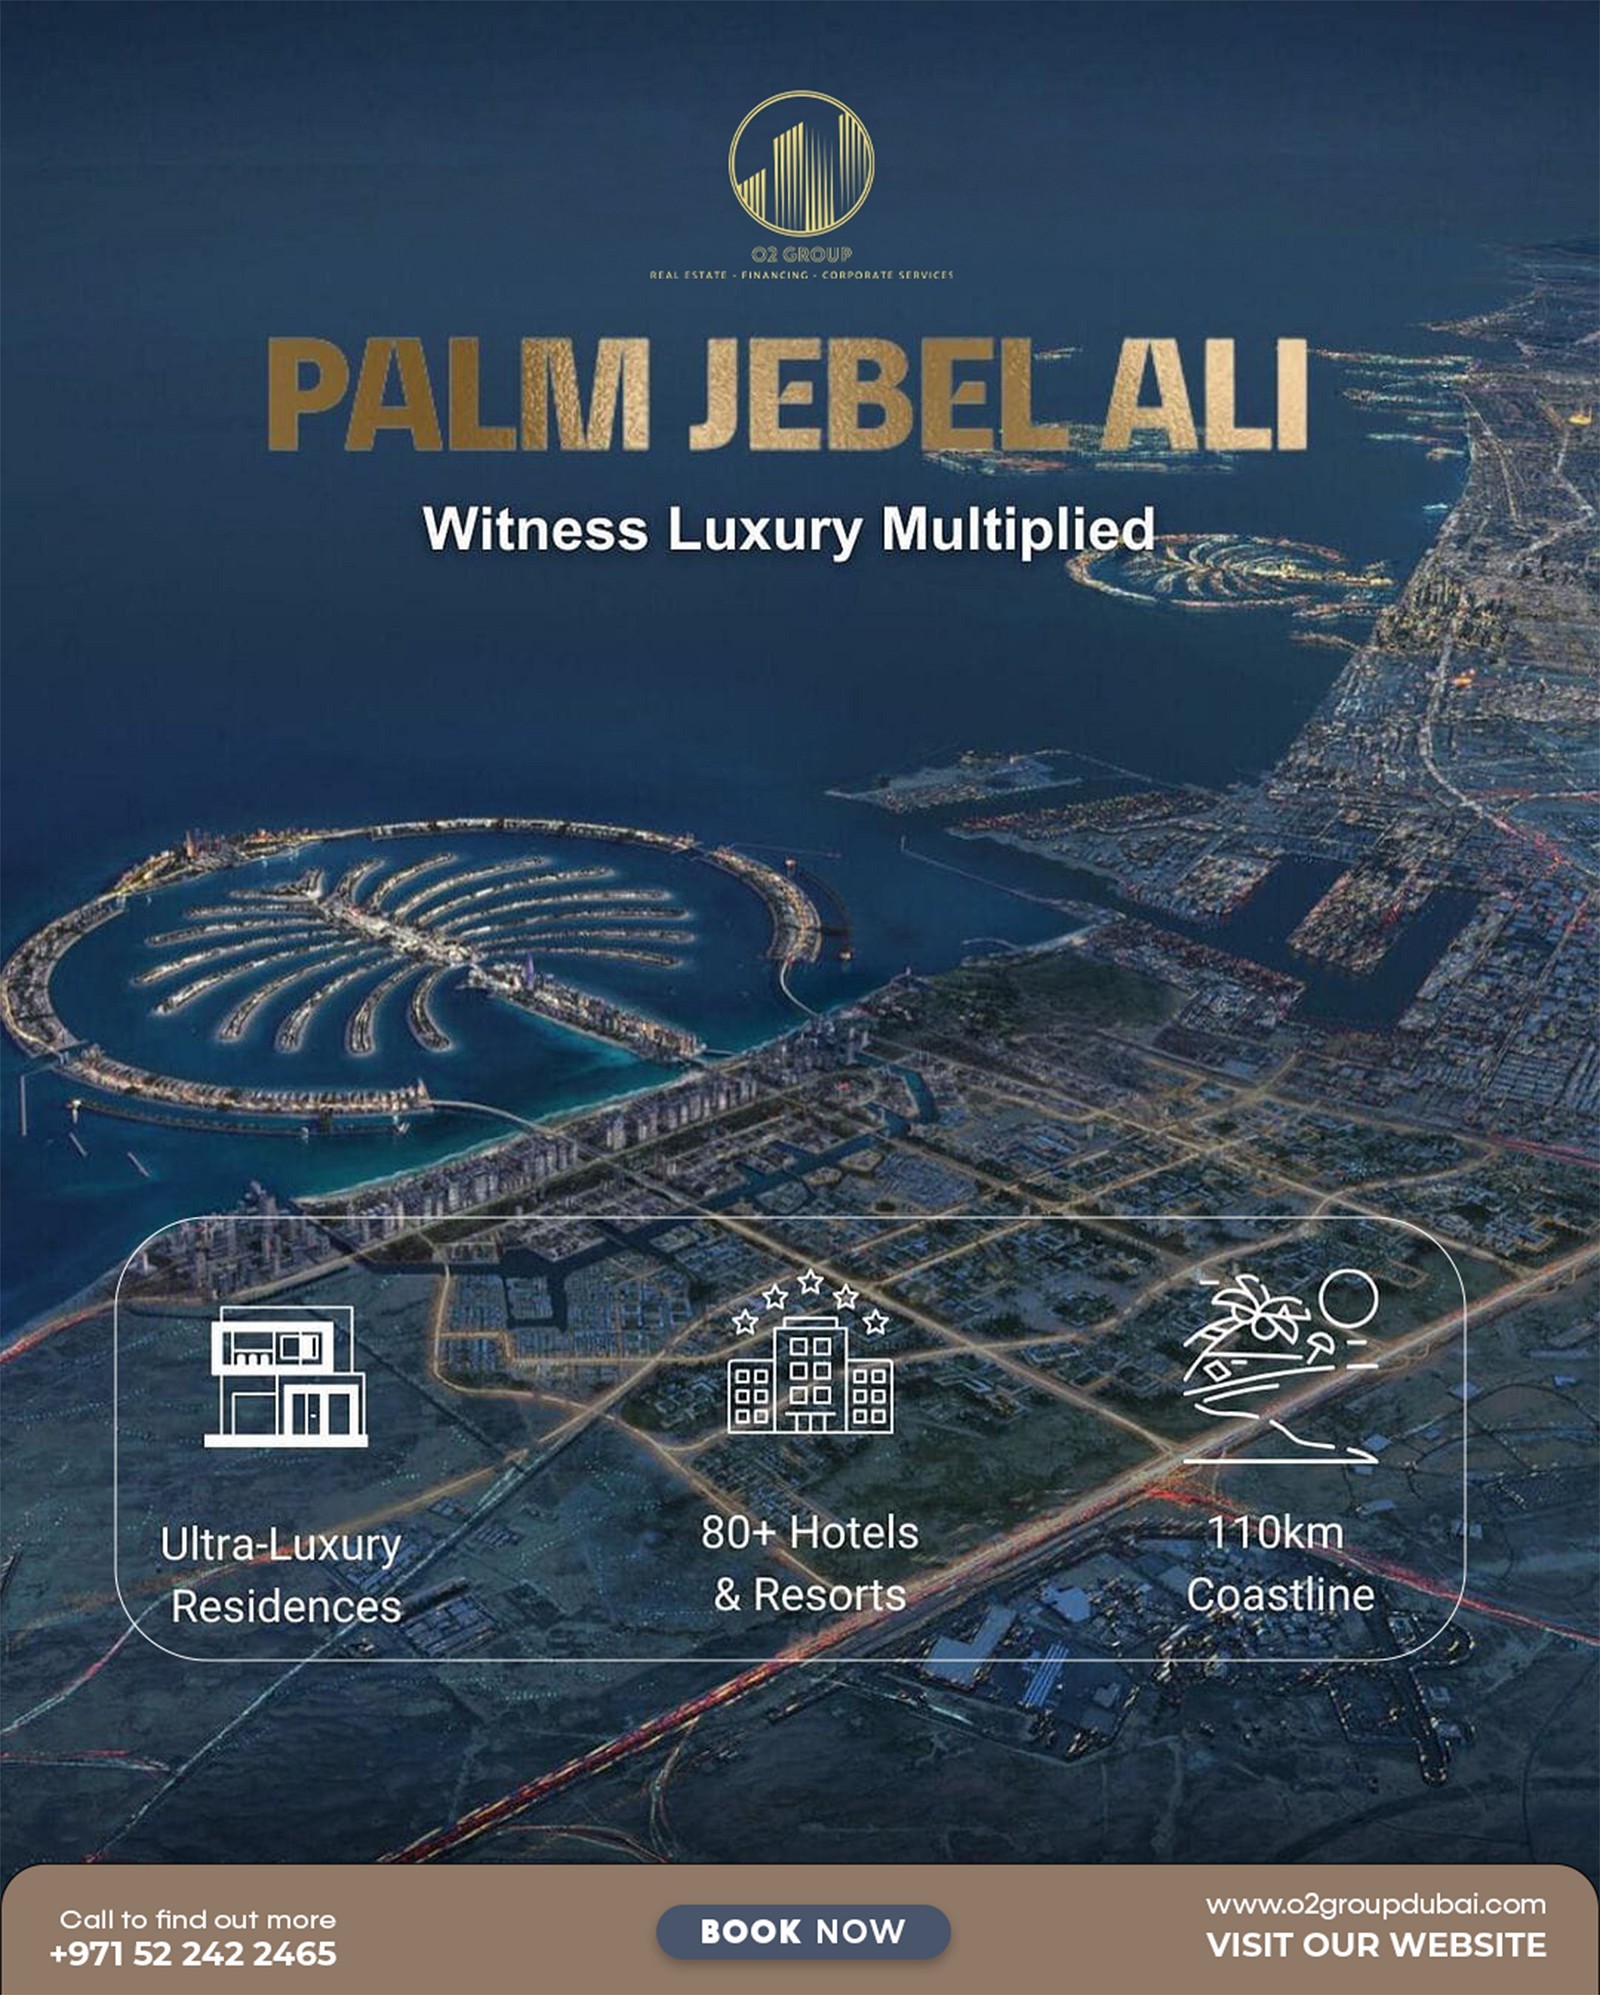 Discover an island twice the size of Palm Jumeirah